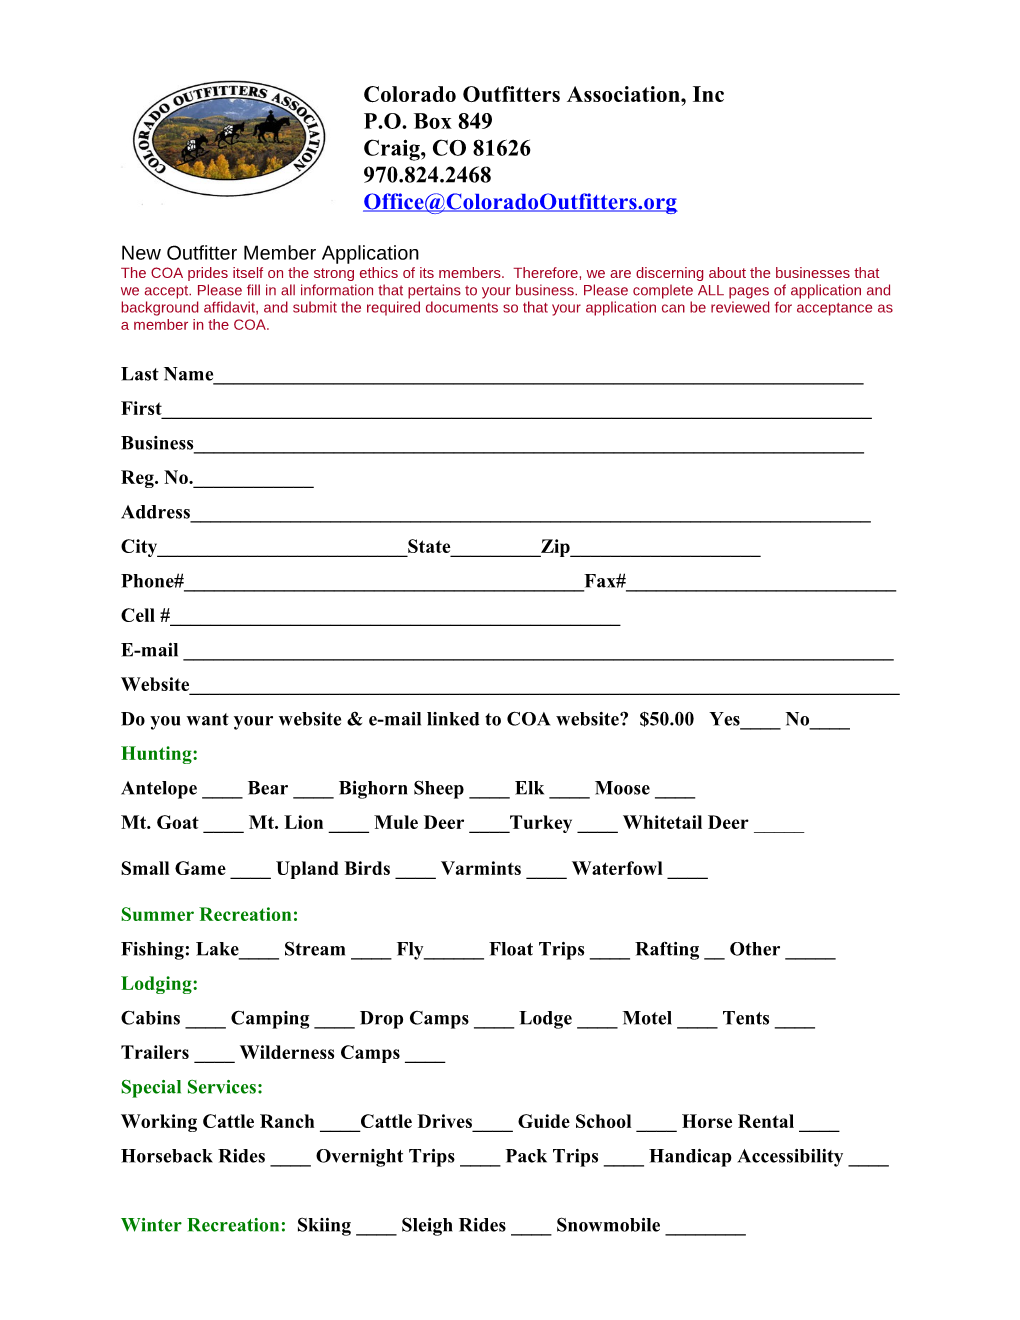 New Outfitter Member Application